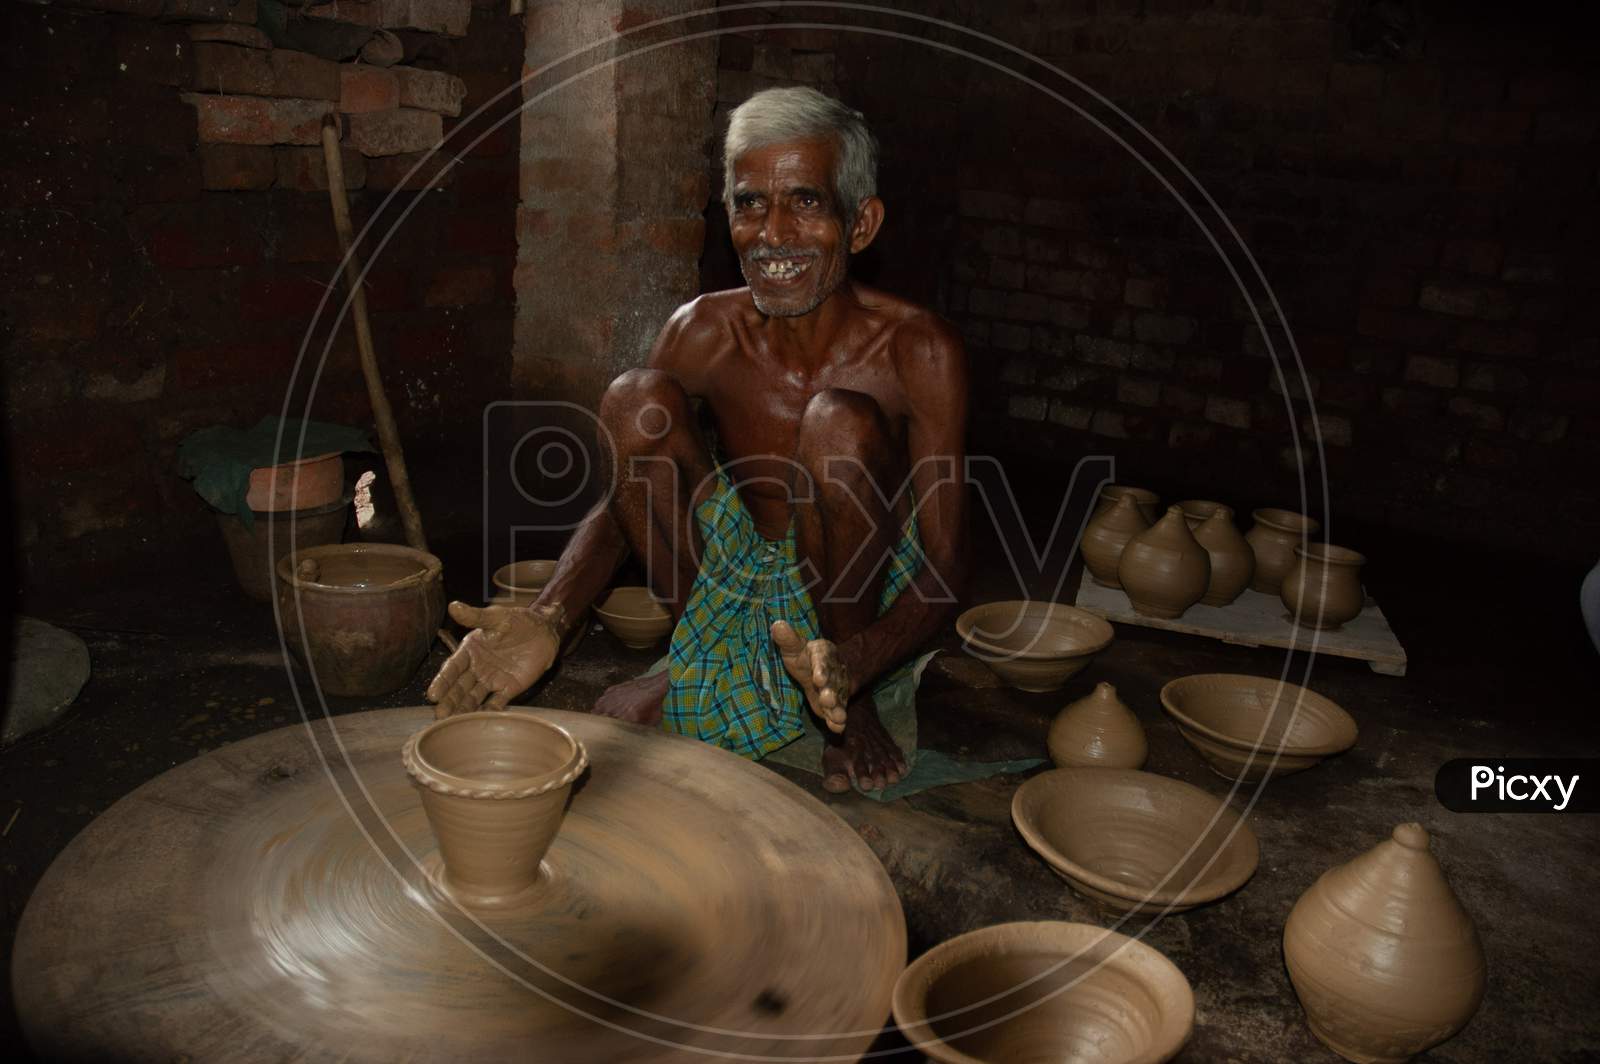 A Potter Making Clay Pots In an Rural Village